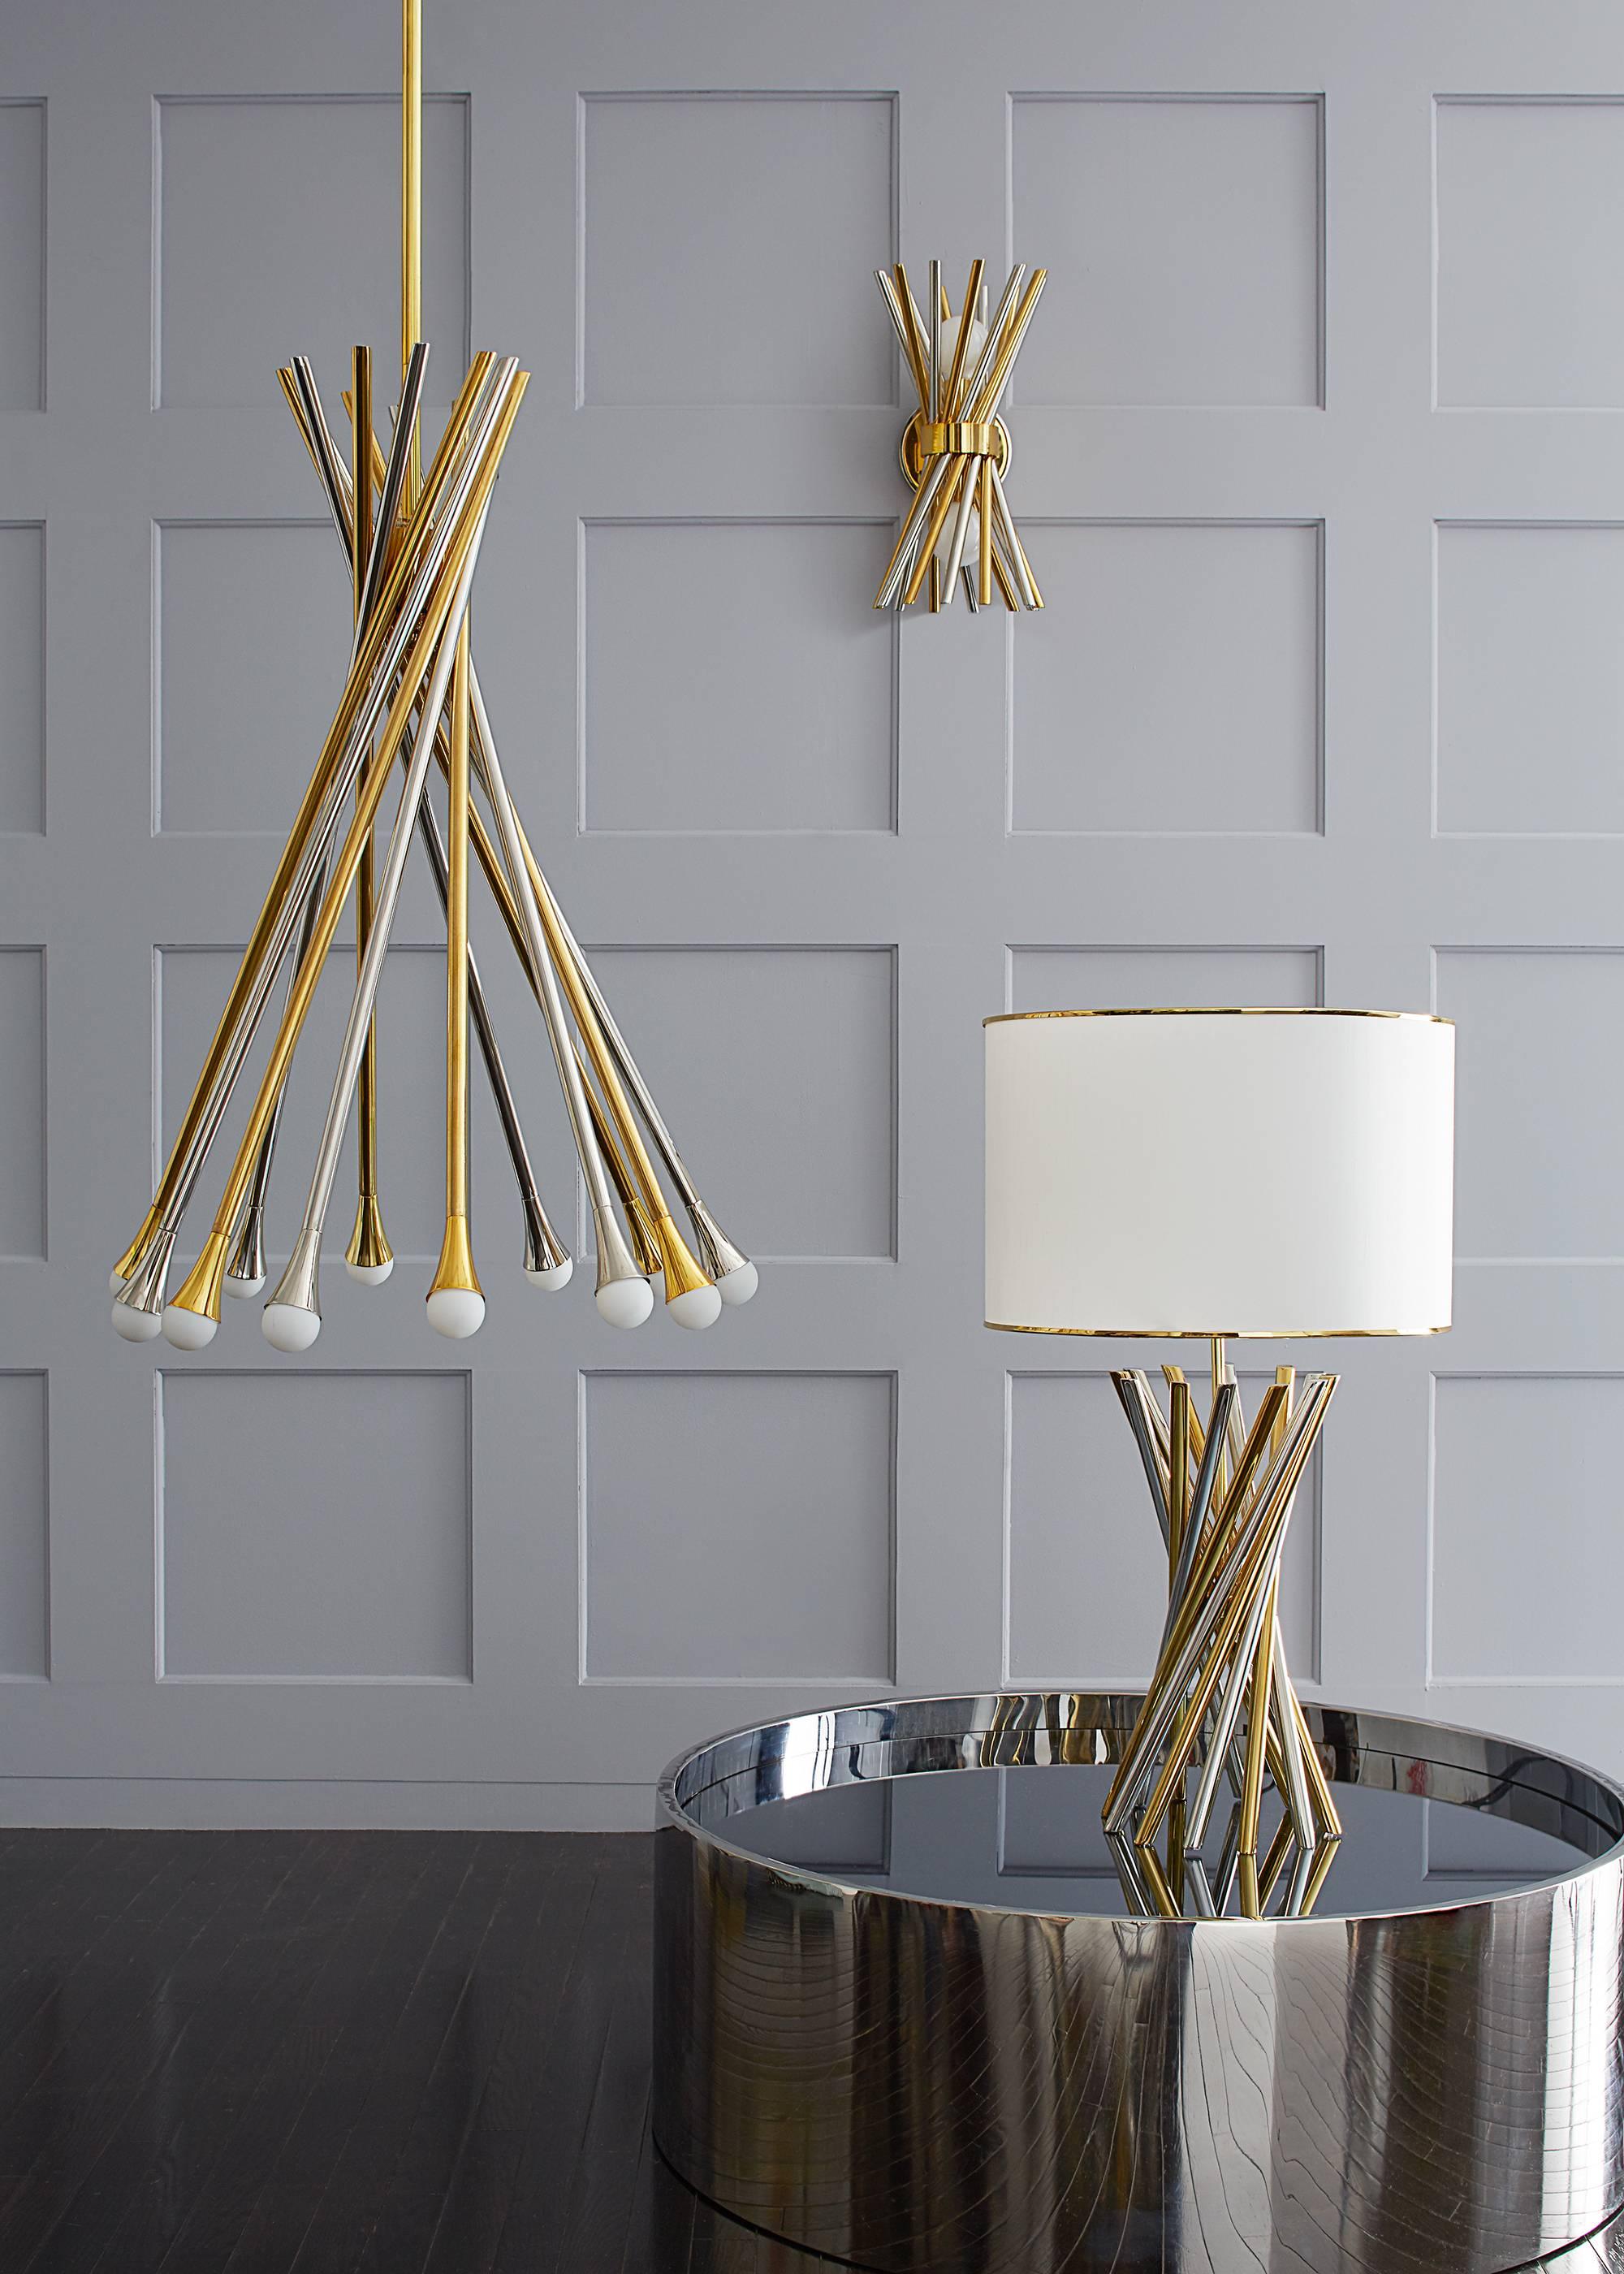 Mixed metals. A swirling constellation of polished brass and polished nickel rods topped with mirrored glass, our electrum accent table is the perfect cocktail perch. With a simple, but kinetic form and a glamorous combo of brass and nickel, our